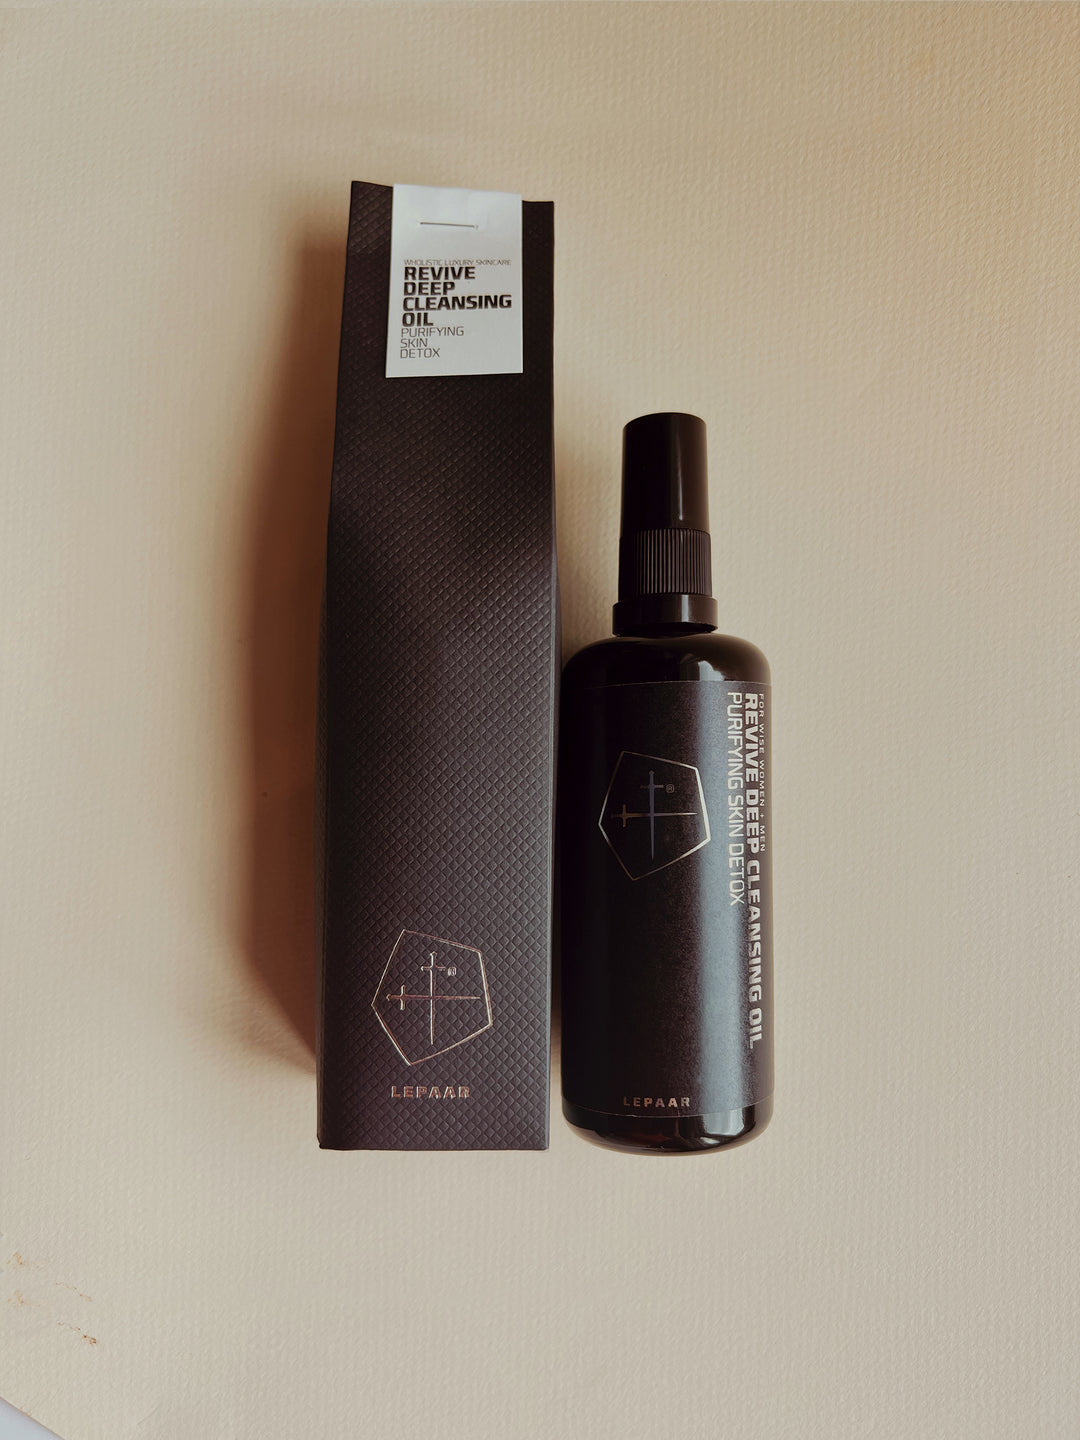 W/S REVIVE DEEP CLEANSING OIL / Purifying detox composition / RP 100ml AUD$75